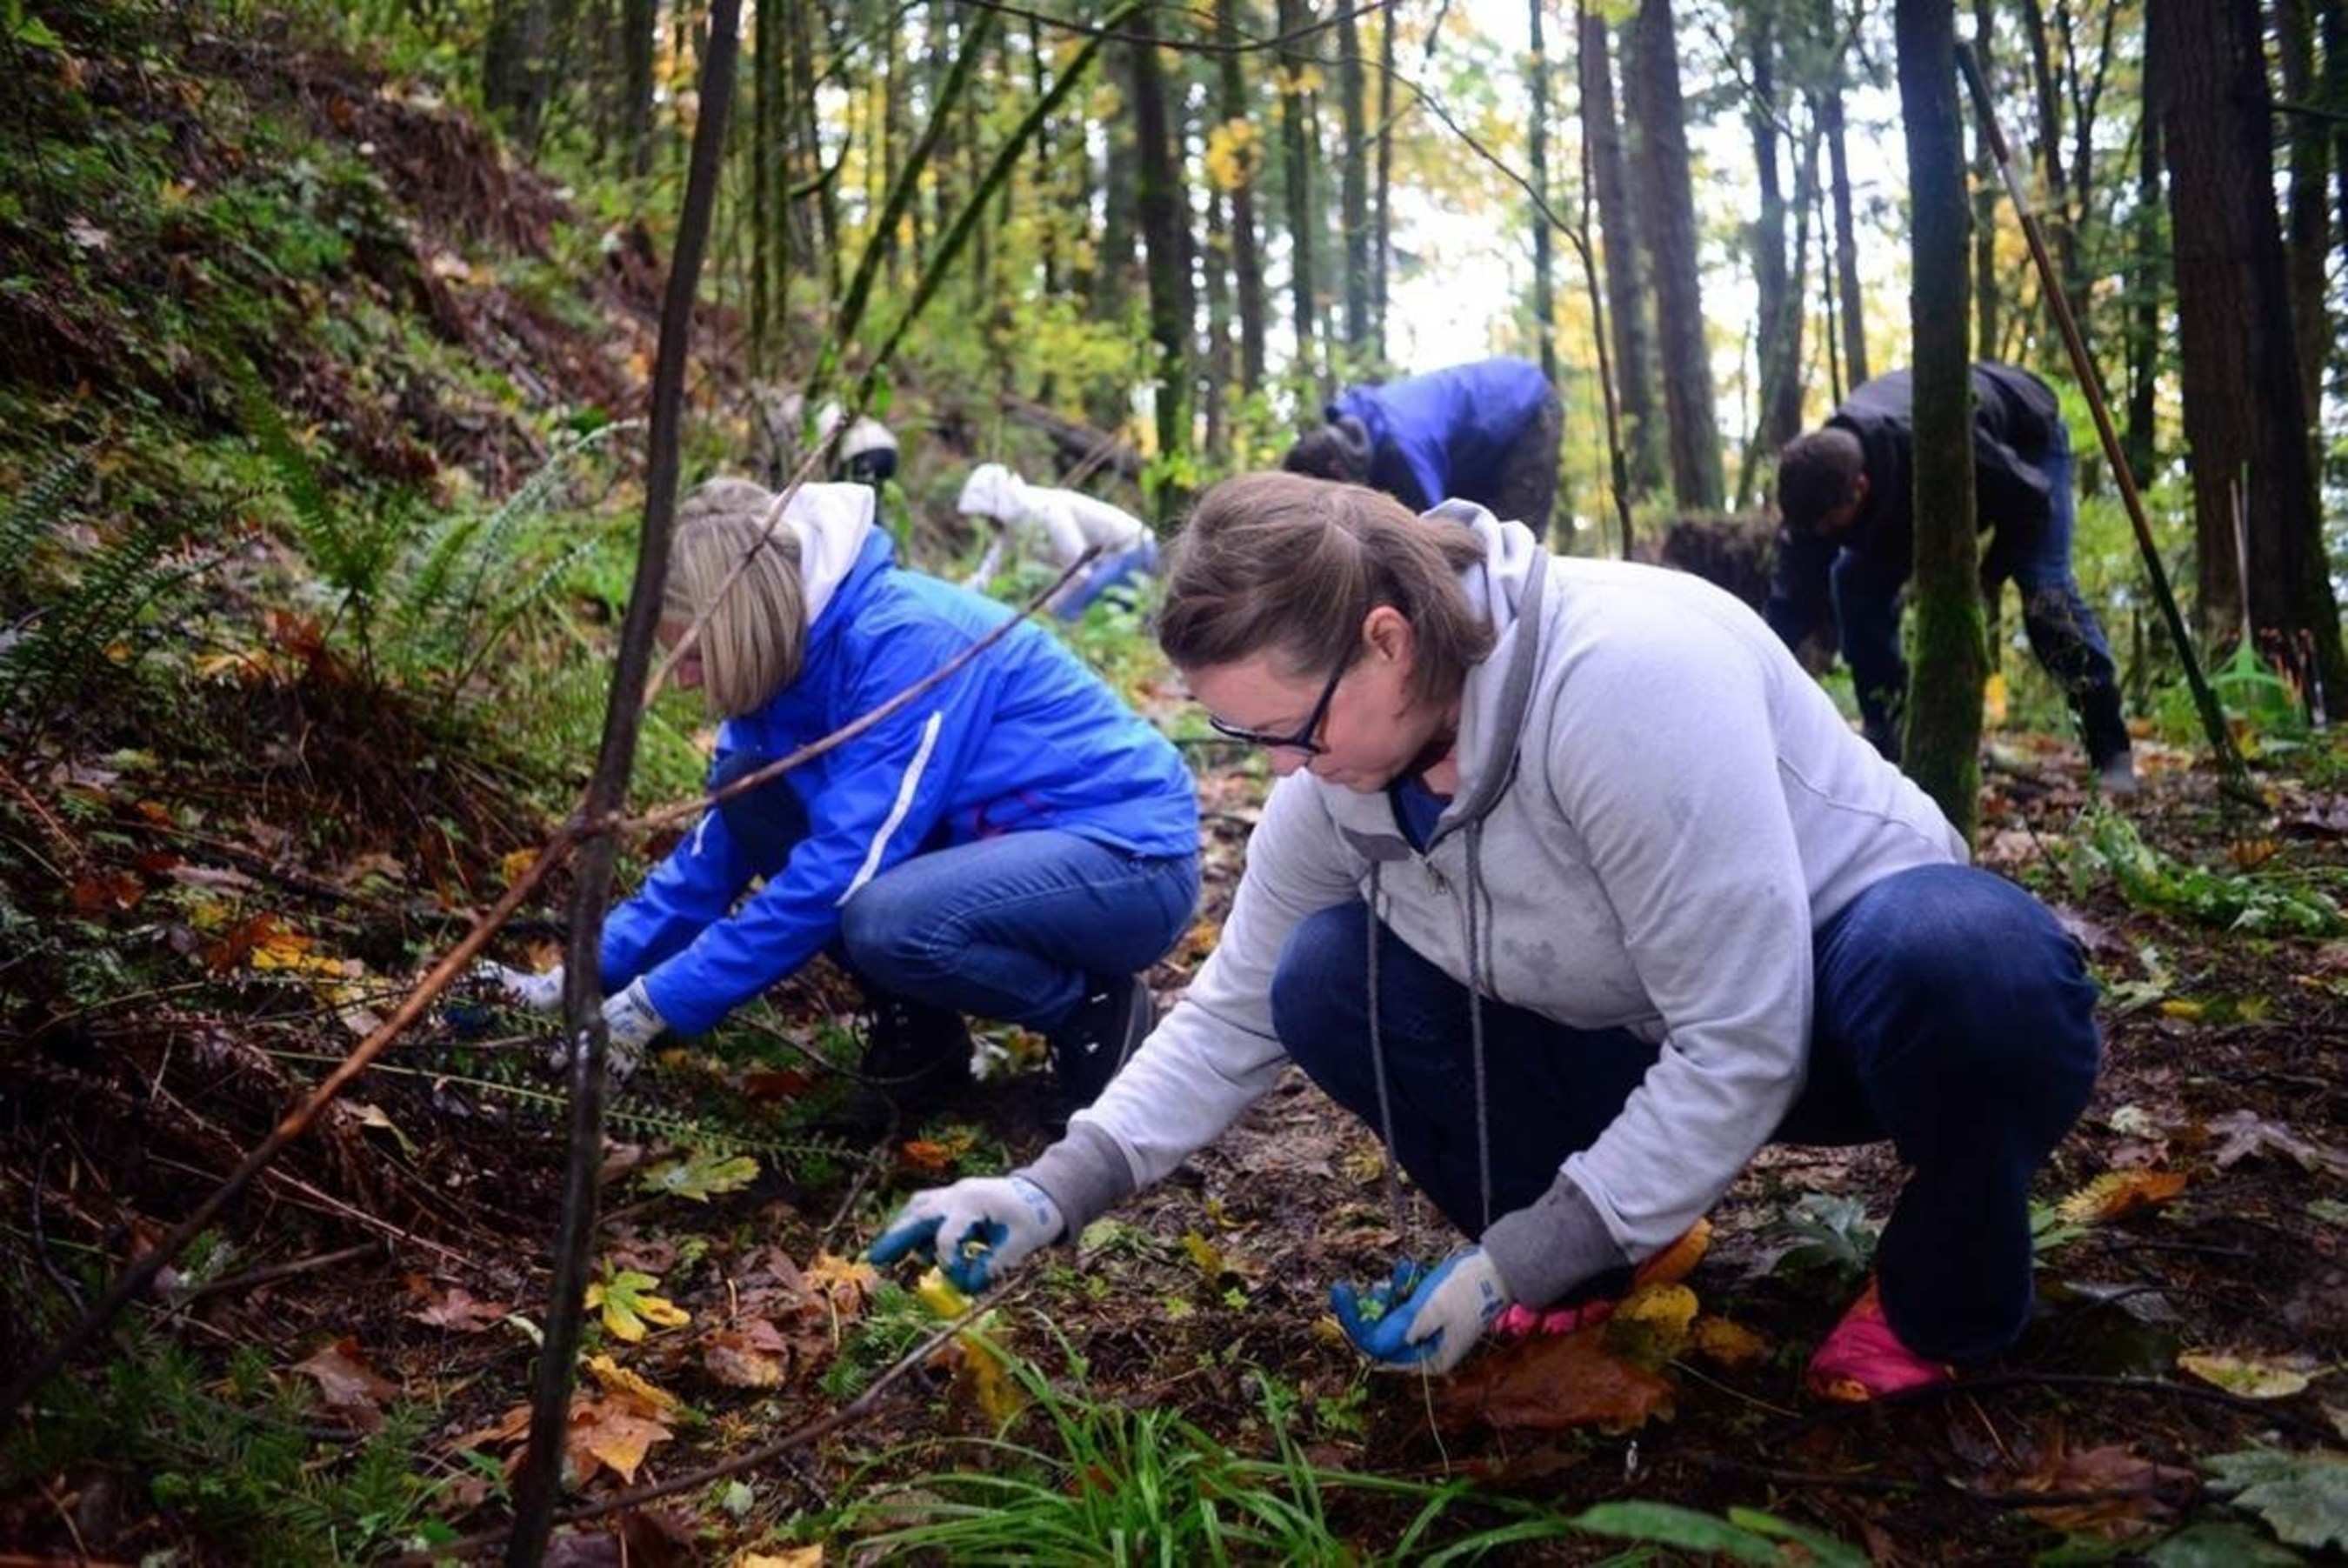 WebMD Cares Impact Day 2016 - Over two days, Portland employees worked with the Forest Park Conservancy on maintaining and restoring trails.